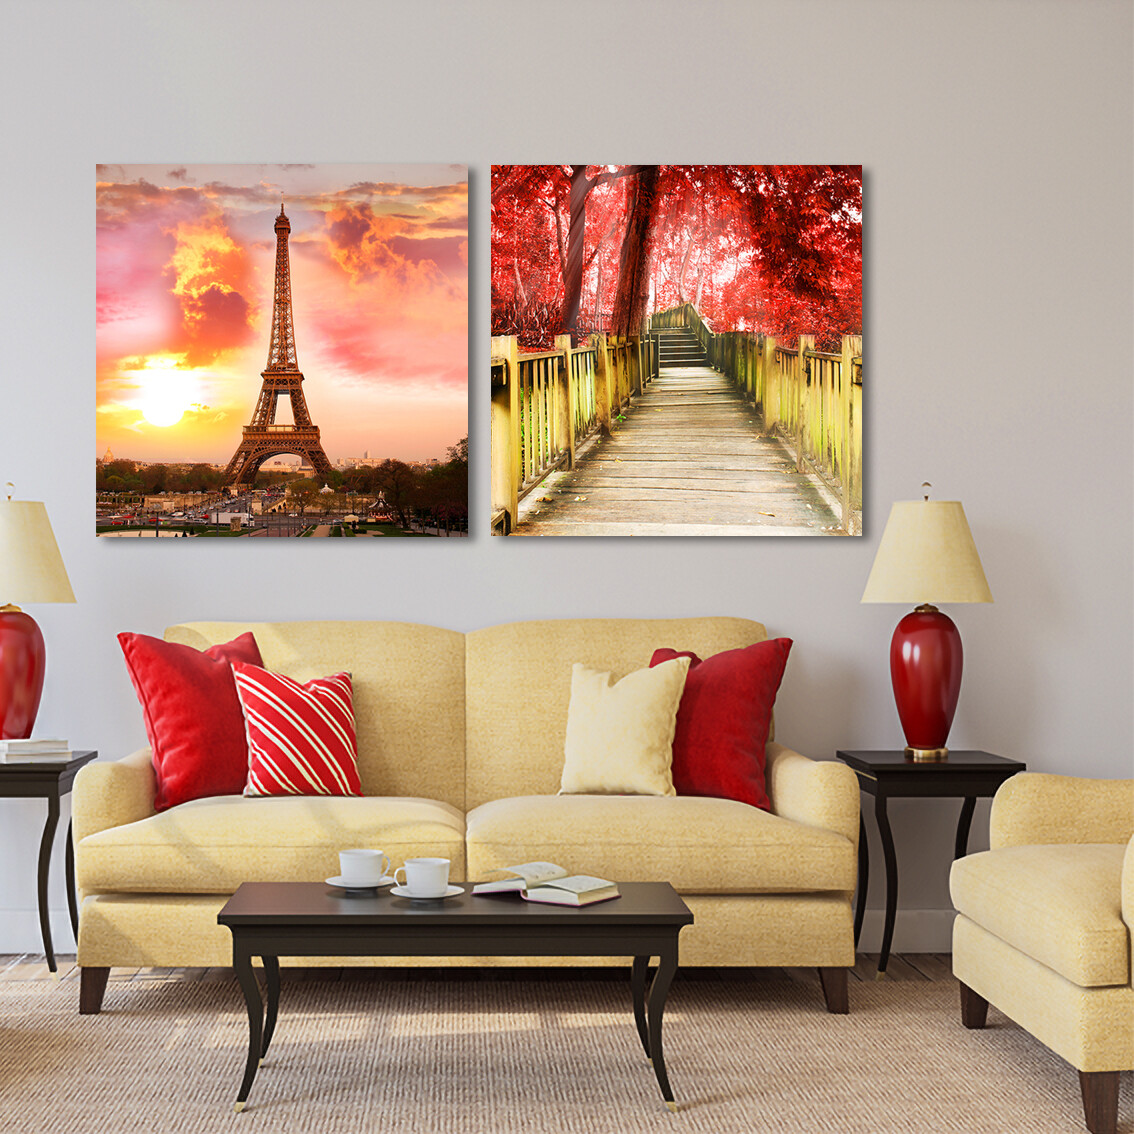 Eiffel Tower at Dusk and Chiang Mai National Park - Modern Luxury Wall art Printed on Acrylic Glass - Frameless and Ready to Hang